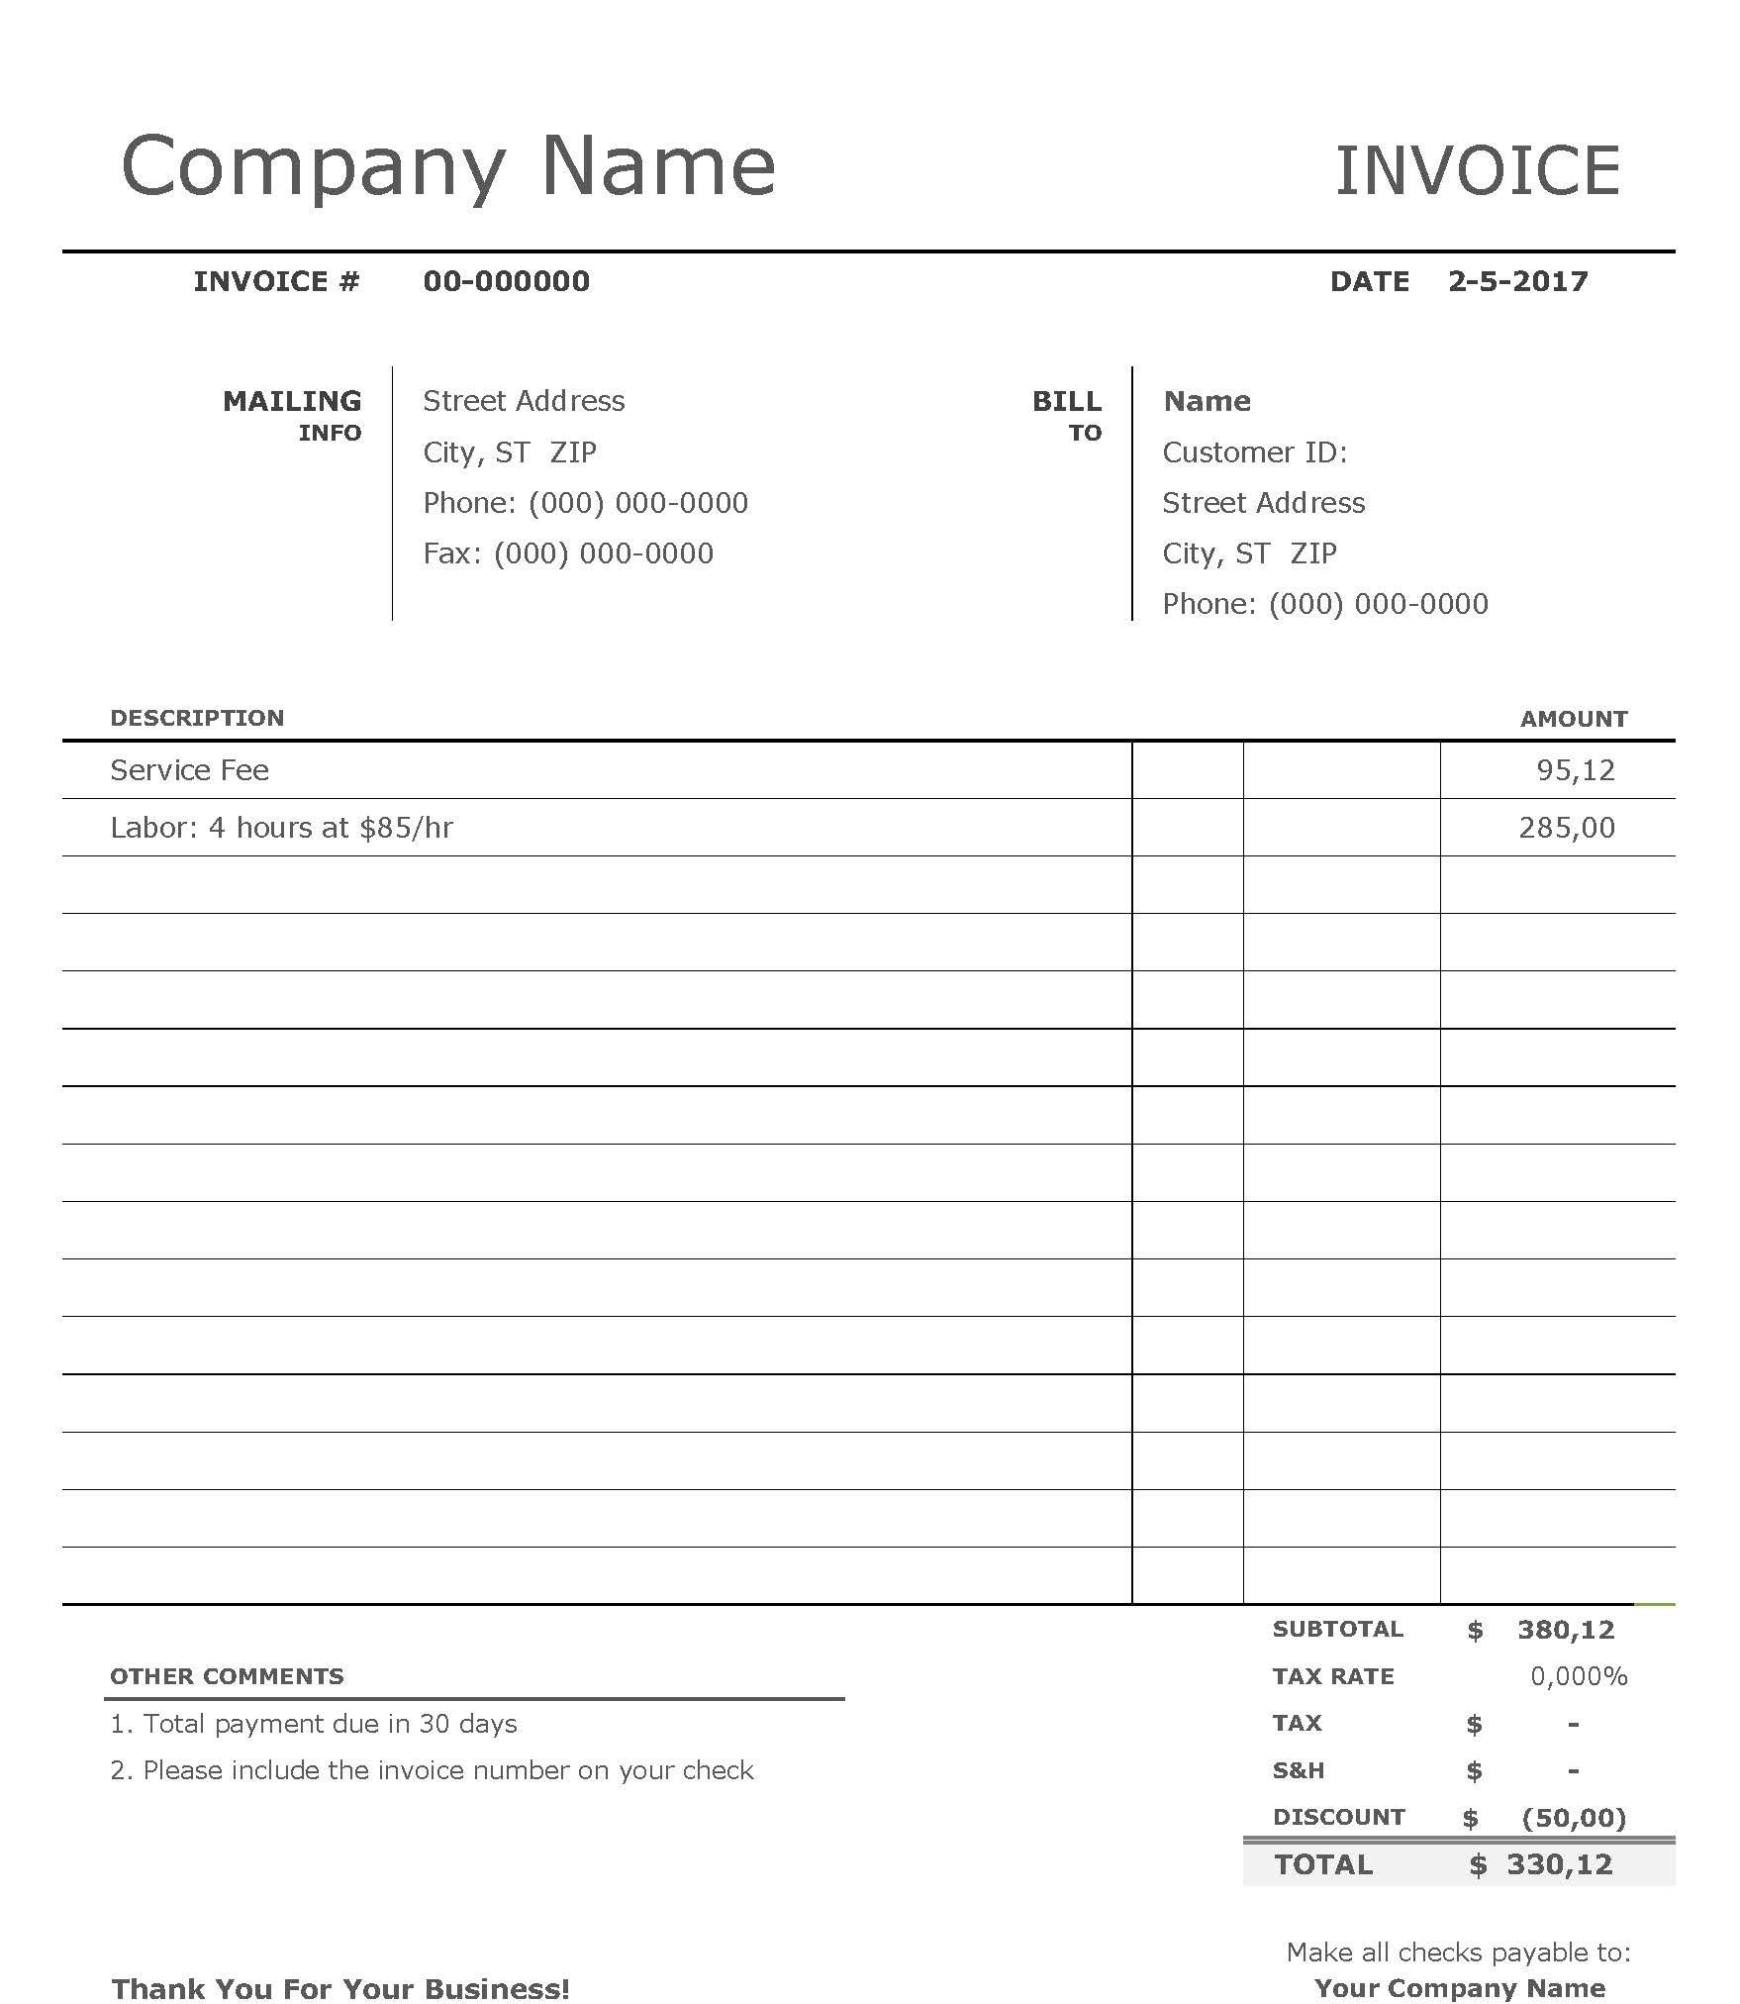 Basic Invoice Template | Templates At Allbusinesstemplates In Free Downloadable Invoice Template